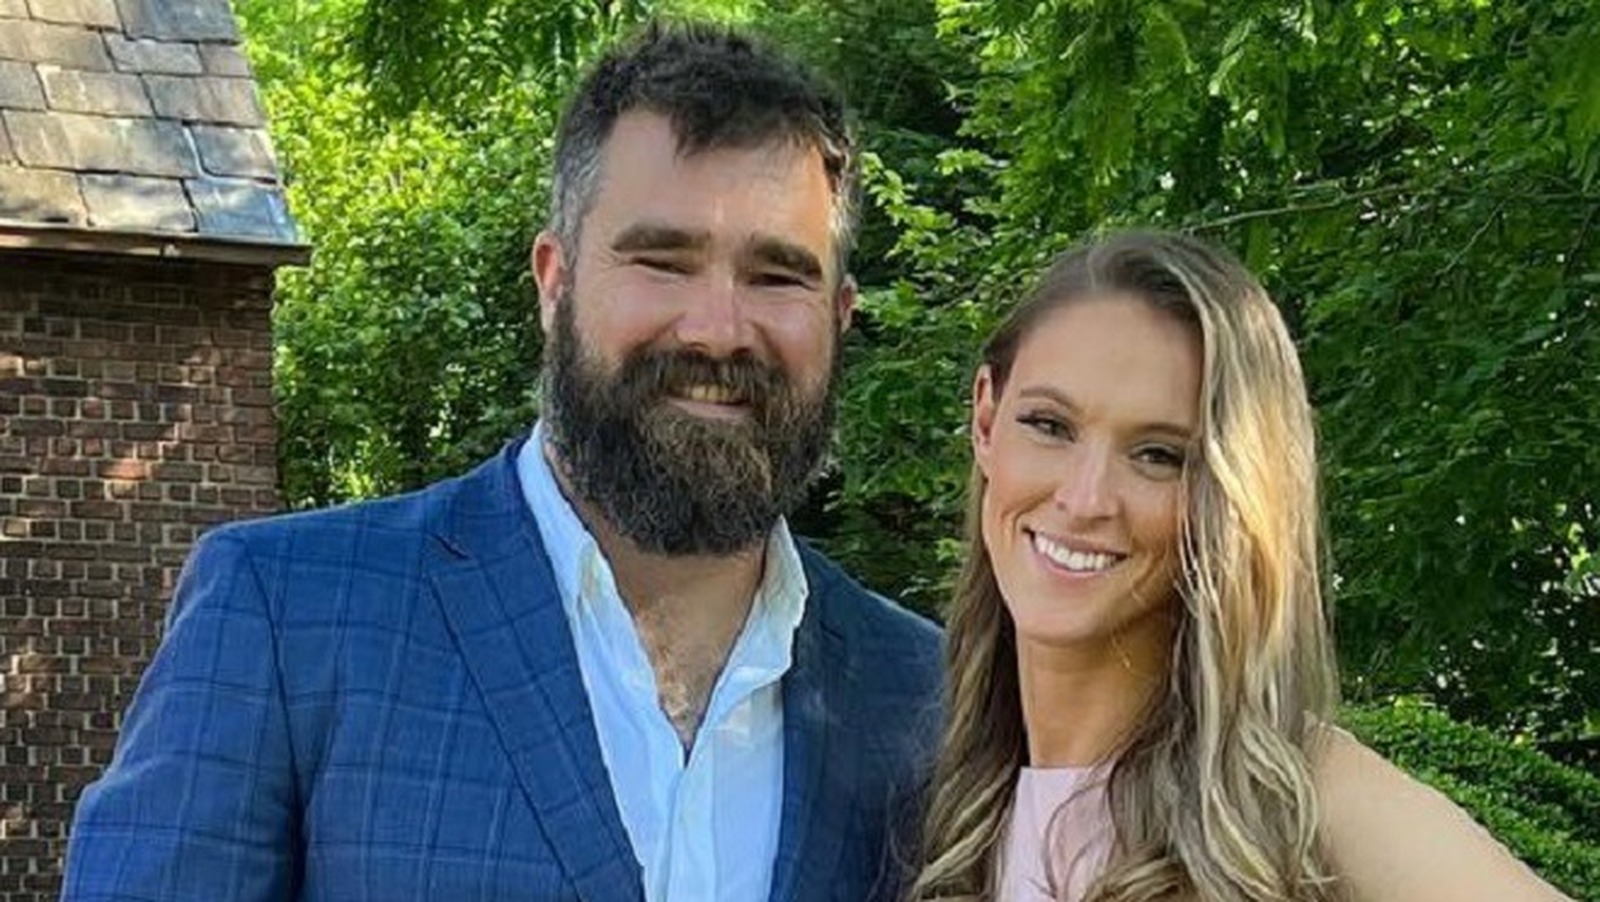 Are Jason Kelce And His Wife Kylie As Happy As They Seem? Our Experts Respond